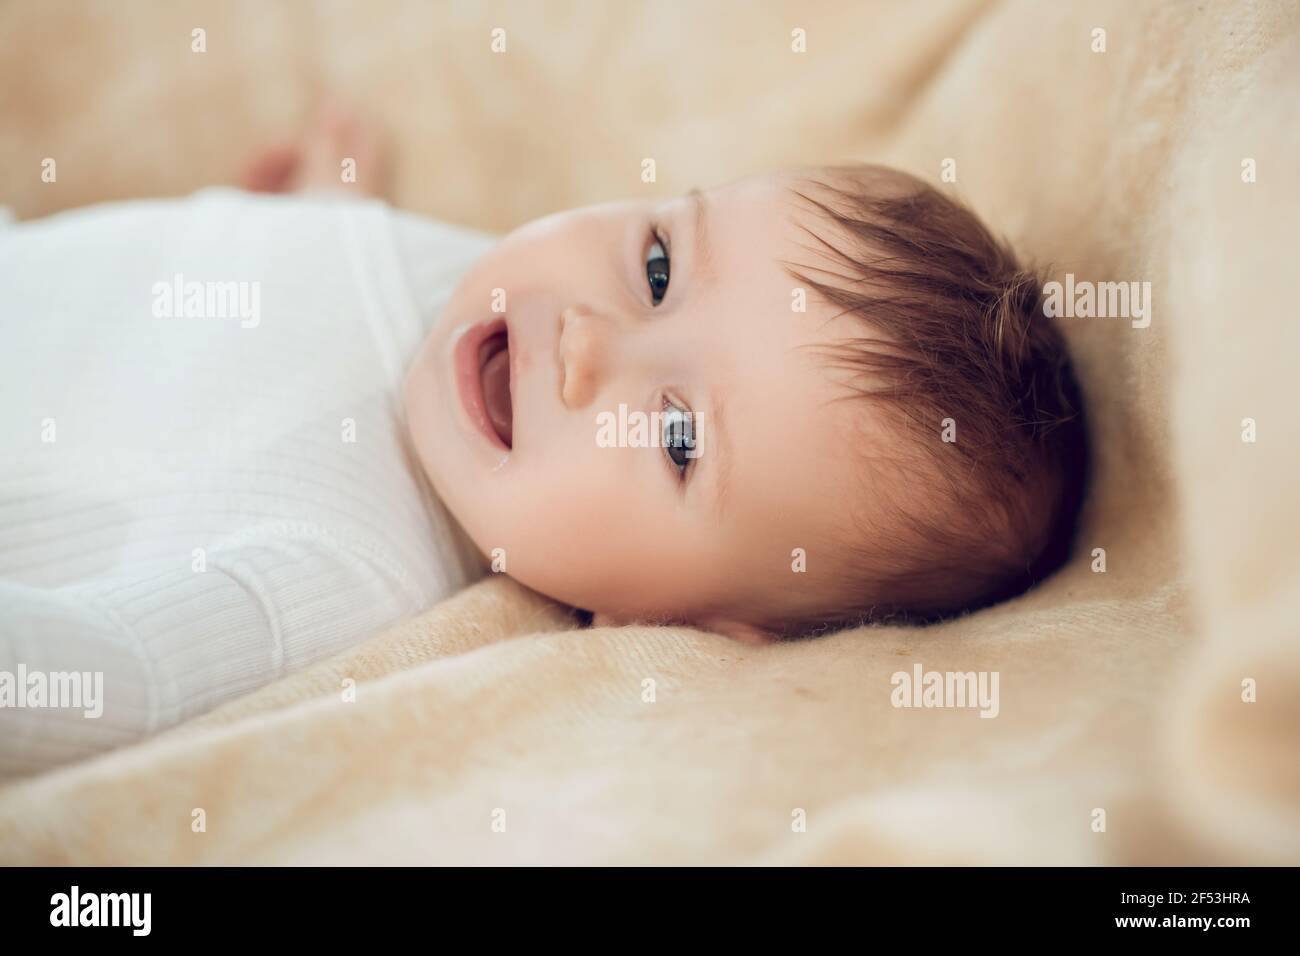 Cheerful smiling kid lying on bed Stock Photo